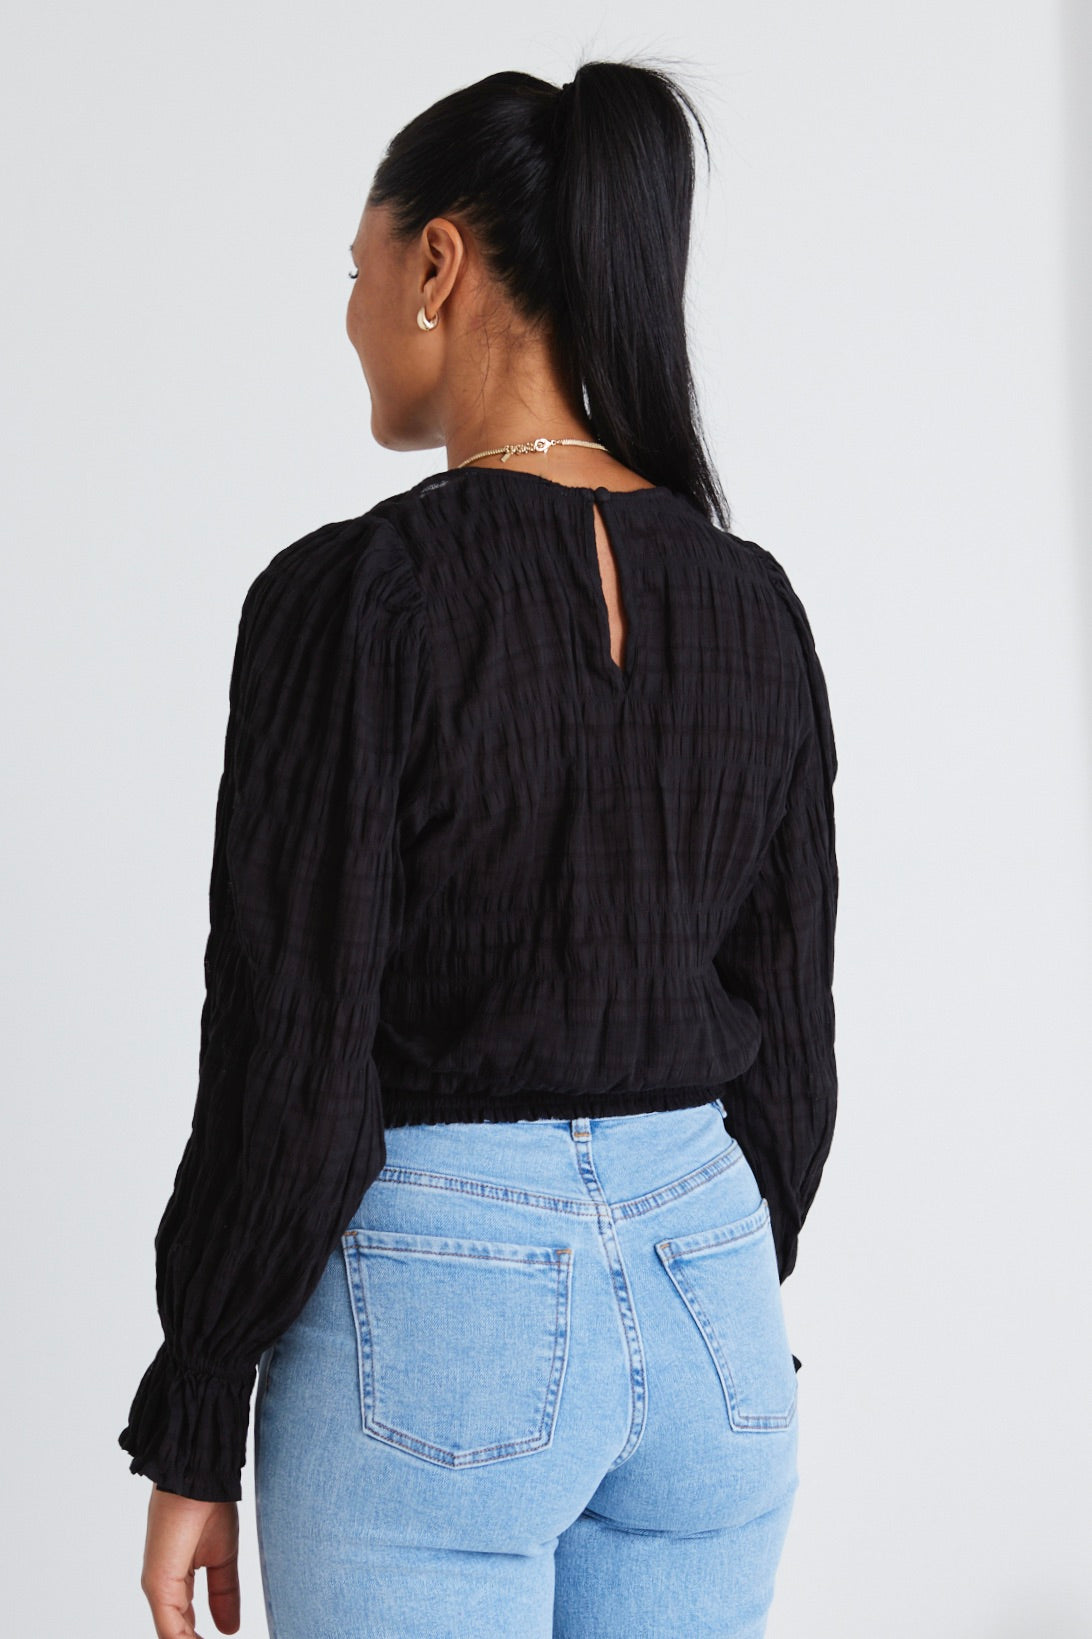 IVY + JACK IMAGINE BLACK SHIRRED FRILL SLEEVE LS TOP - THE VOGUE STORE